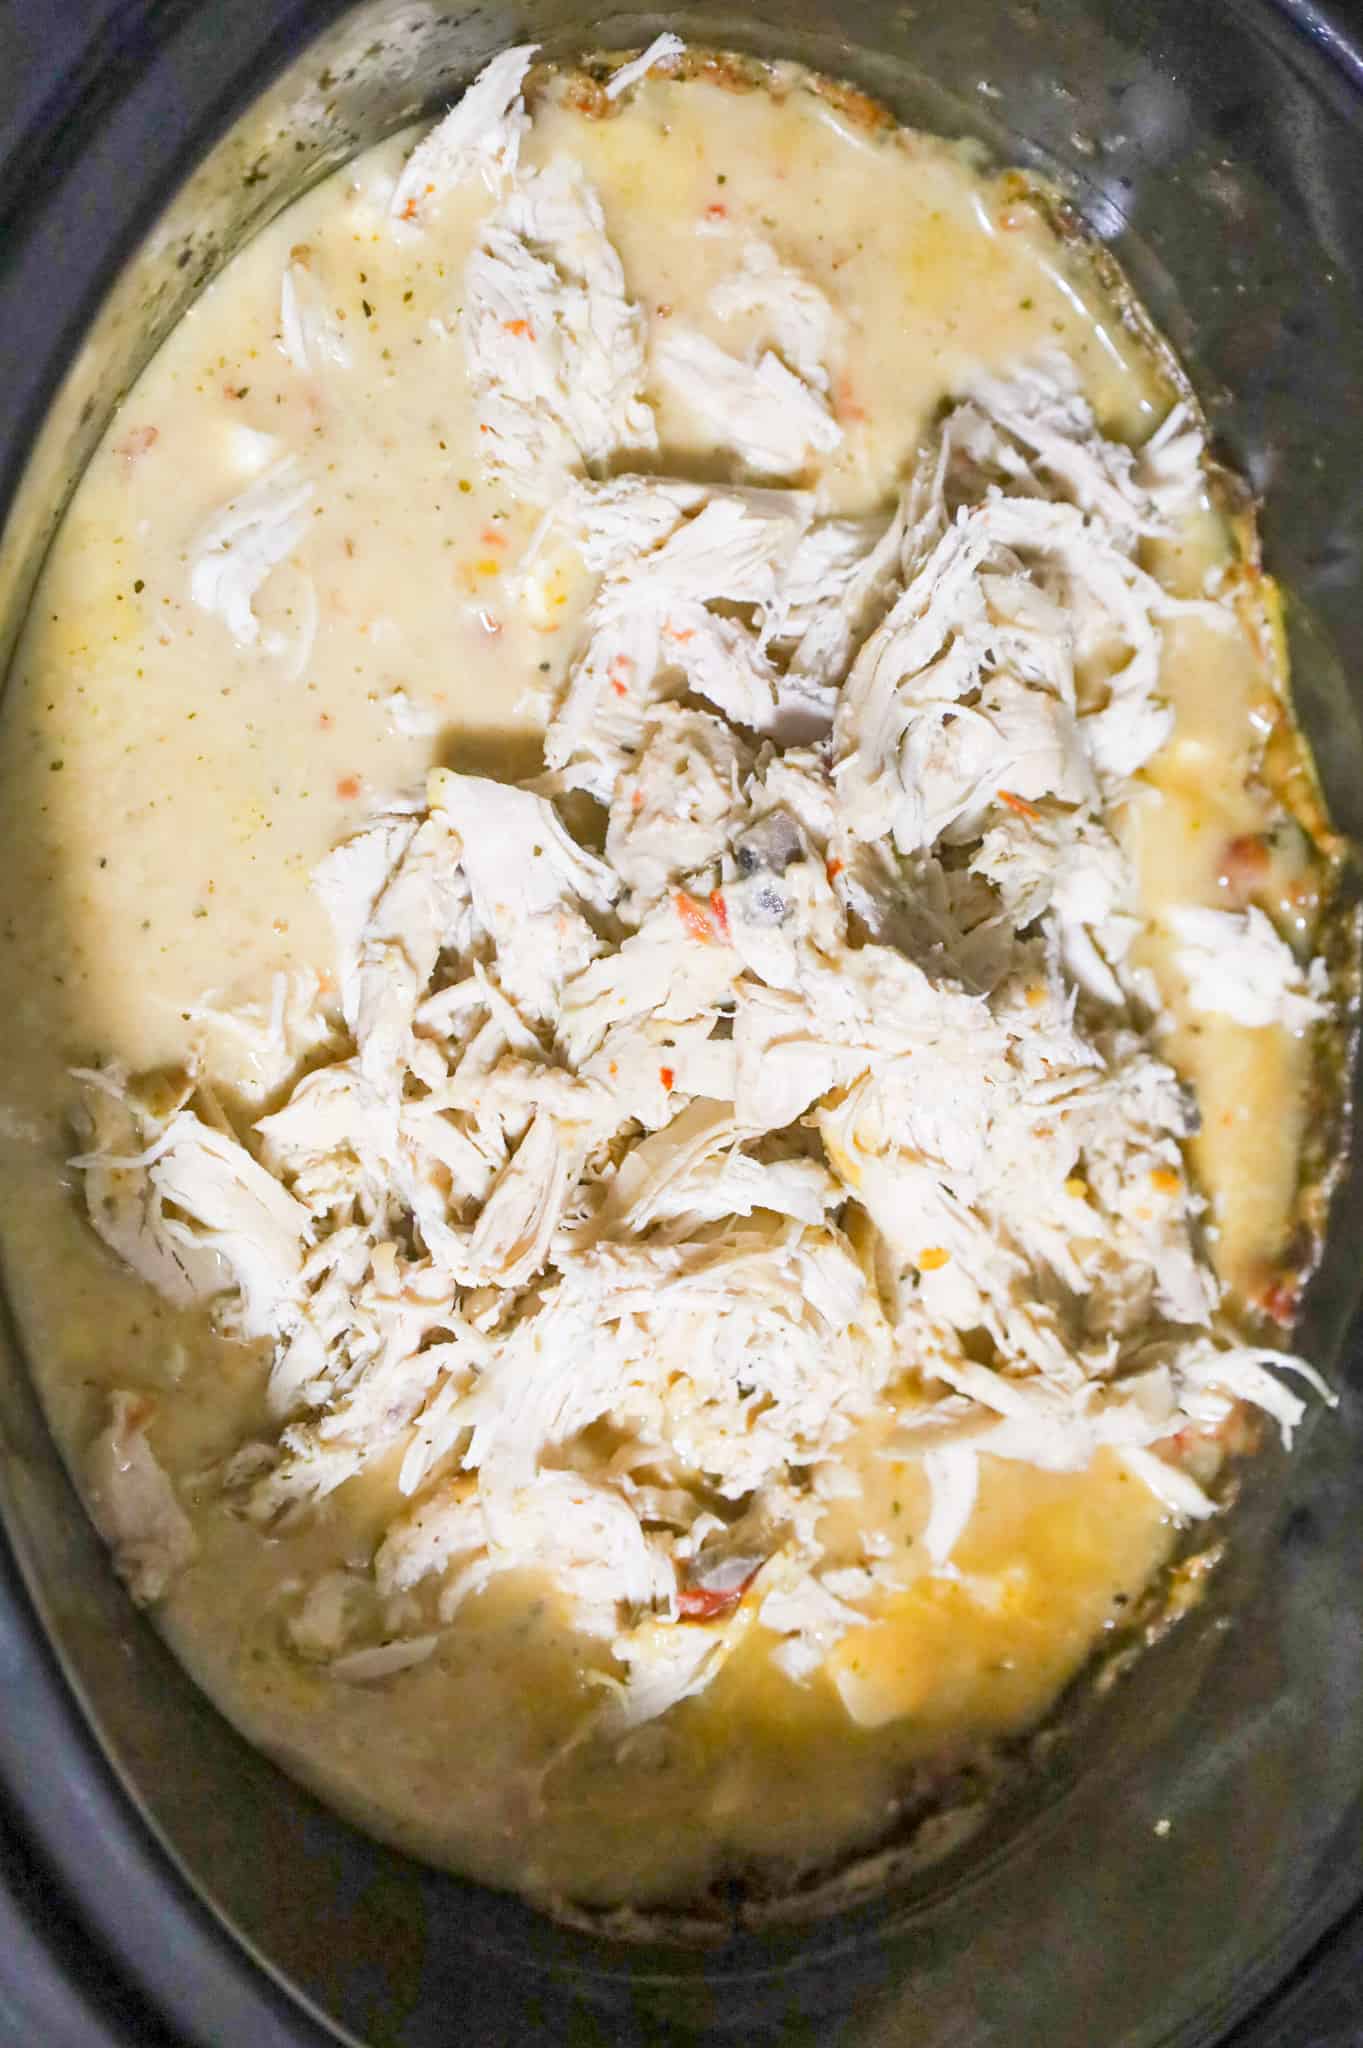 shredded chicken on top cream soup mixture in a crock pot of cream soup mixture in 